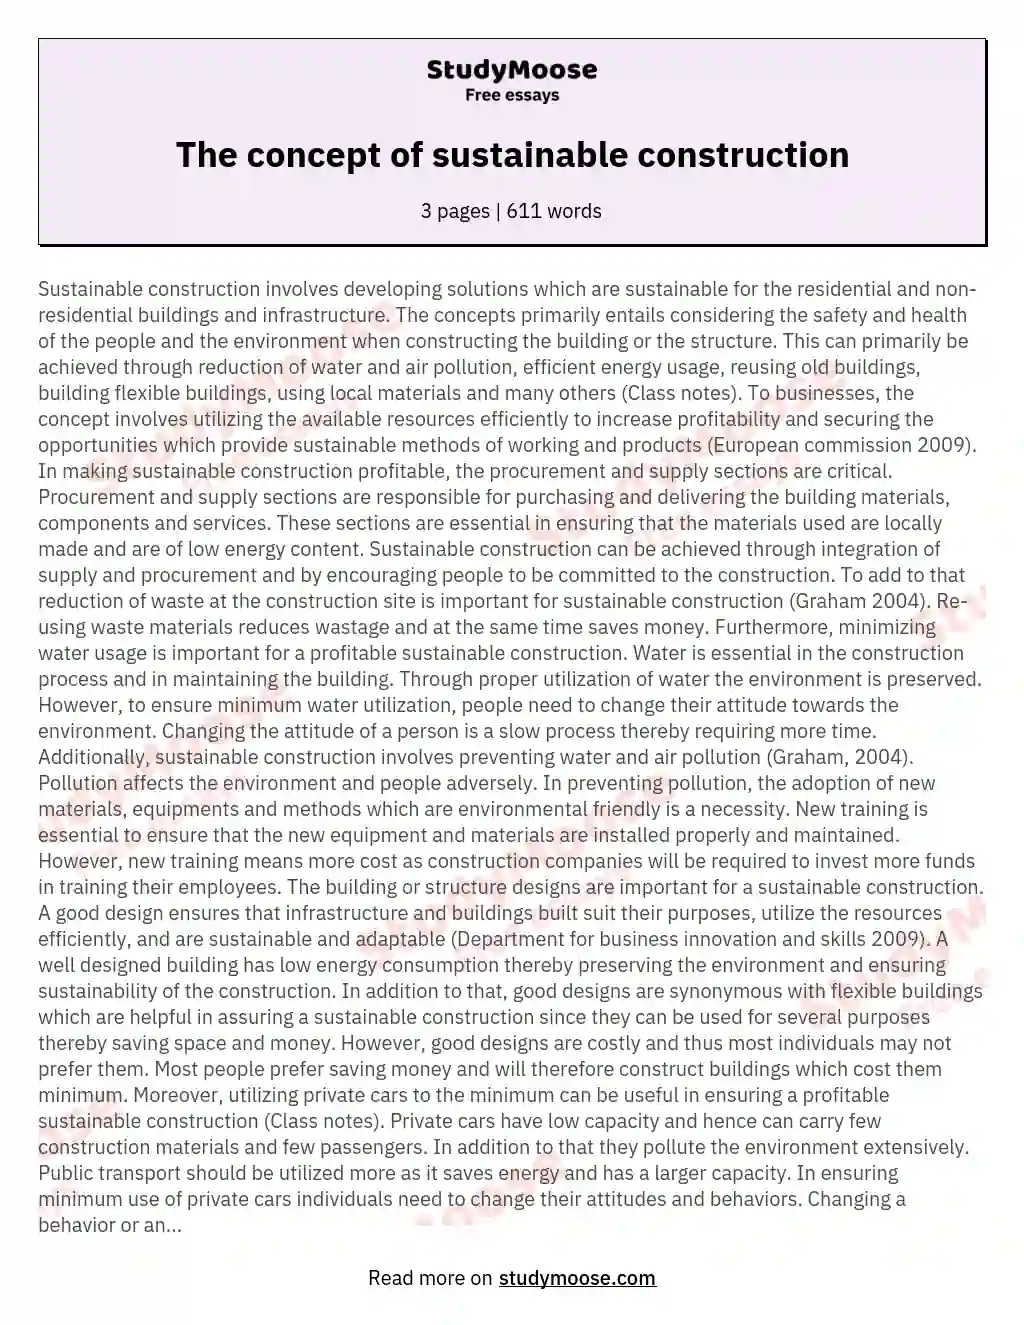 The concept of sustainable construction essay